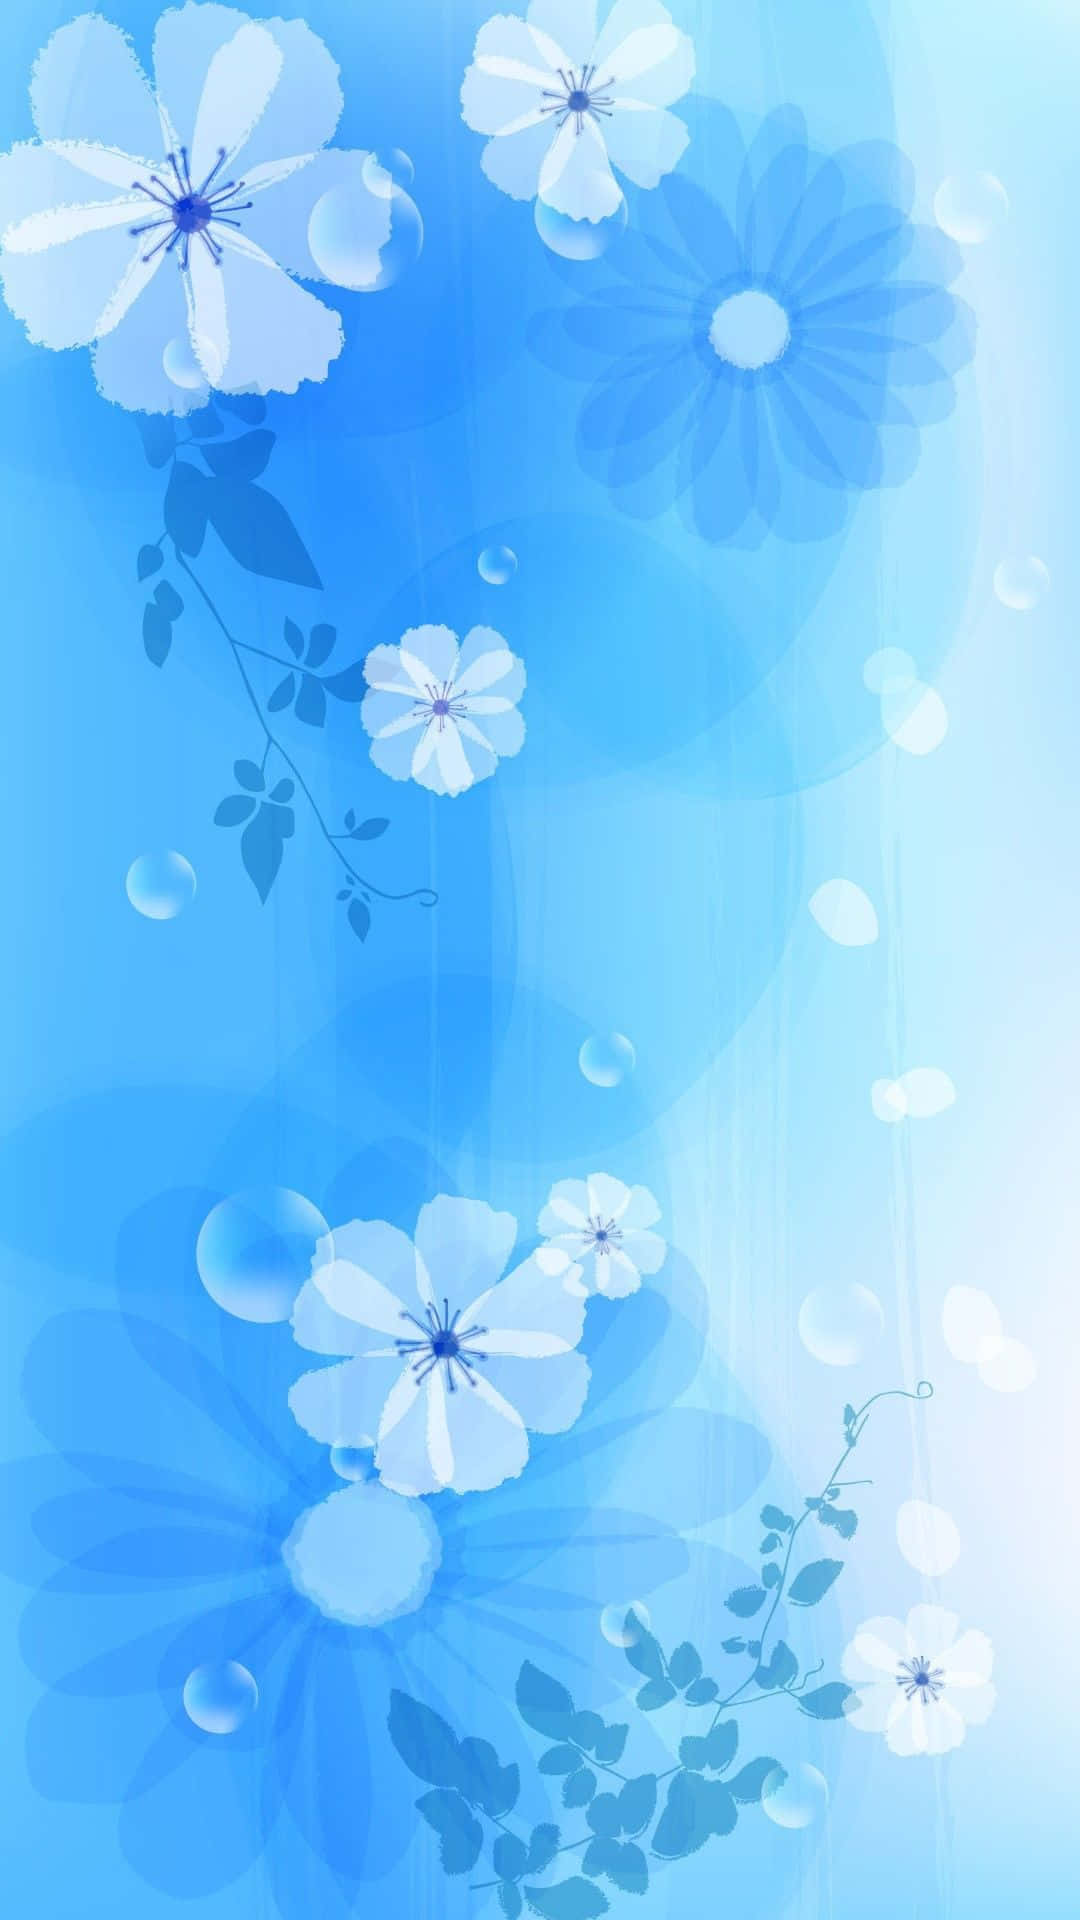 Need a new phone? Get the bright, easy to use Cute Blue Iphone! Wallpaper